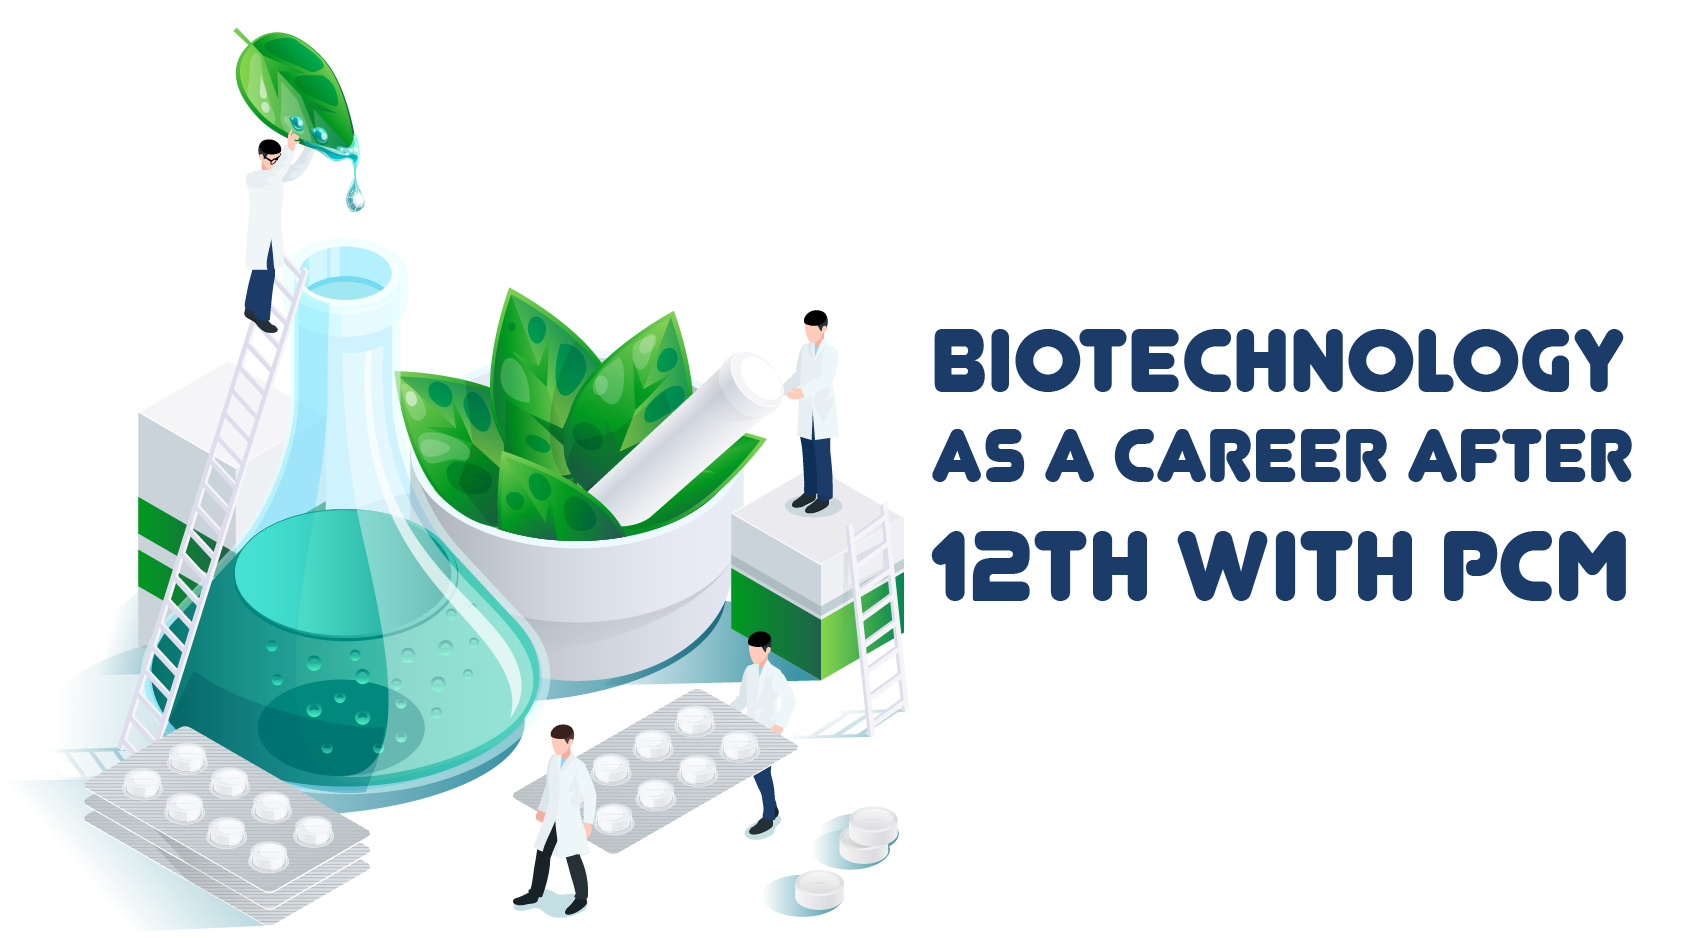 Career Options in Biotechnology after 12th with Jobs EducationAsia